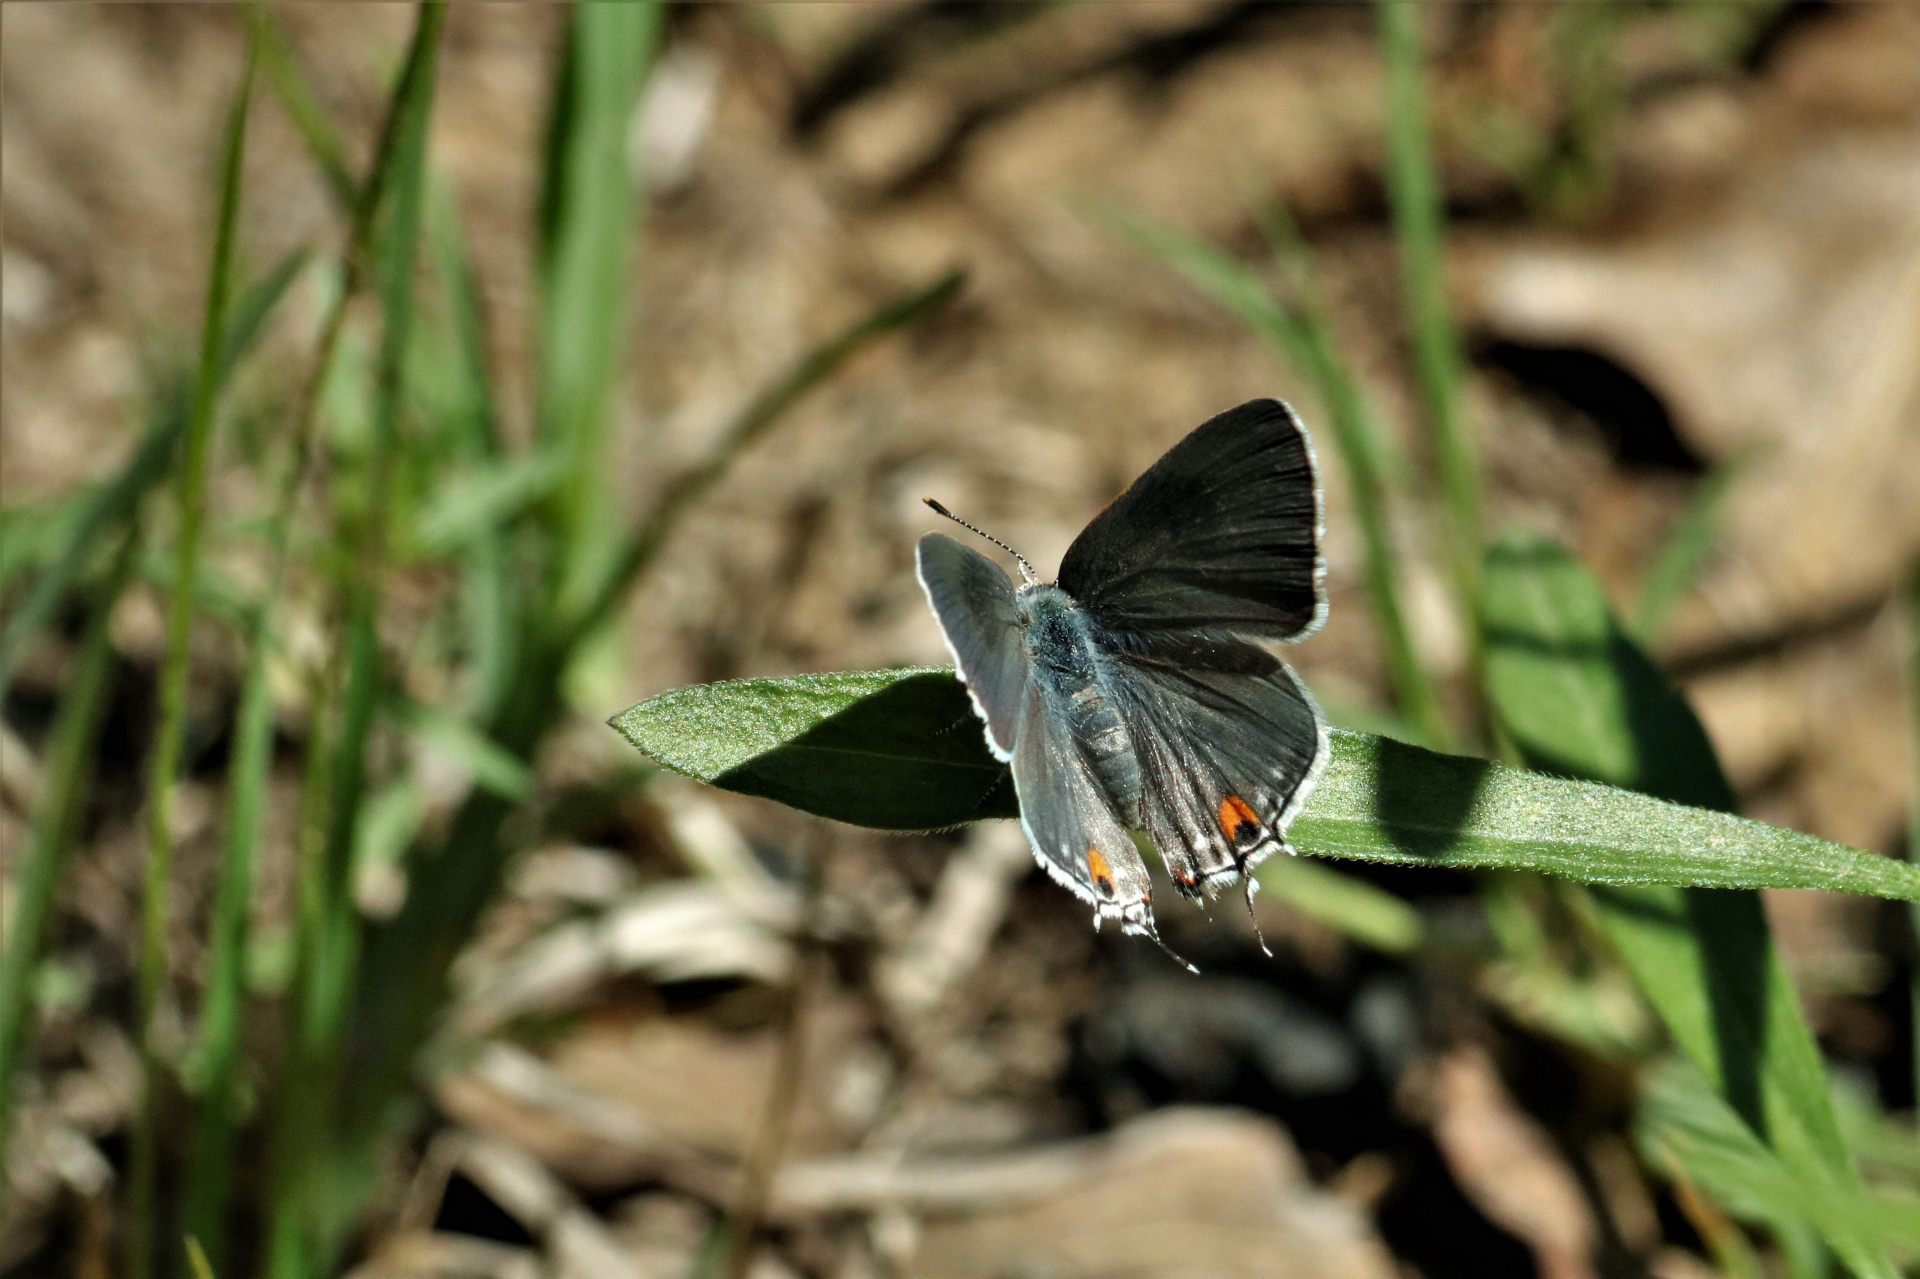 Close-up dorsal view of a gray hairstreak butterfly with dark gray wings and orange spots, sitting on a green leaf with a blurred background.